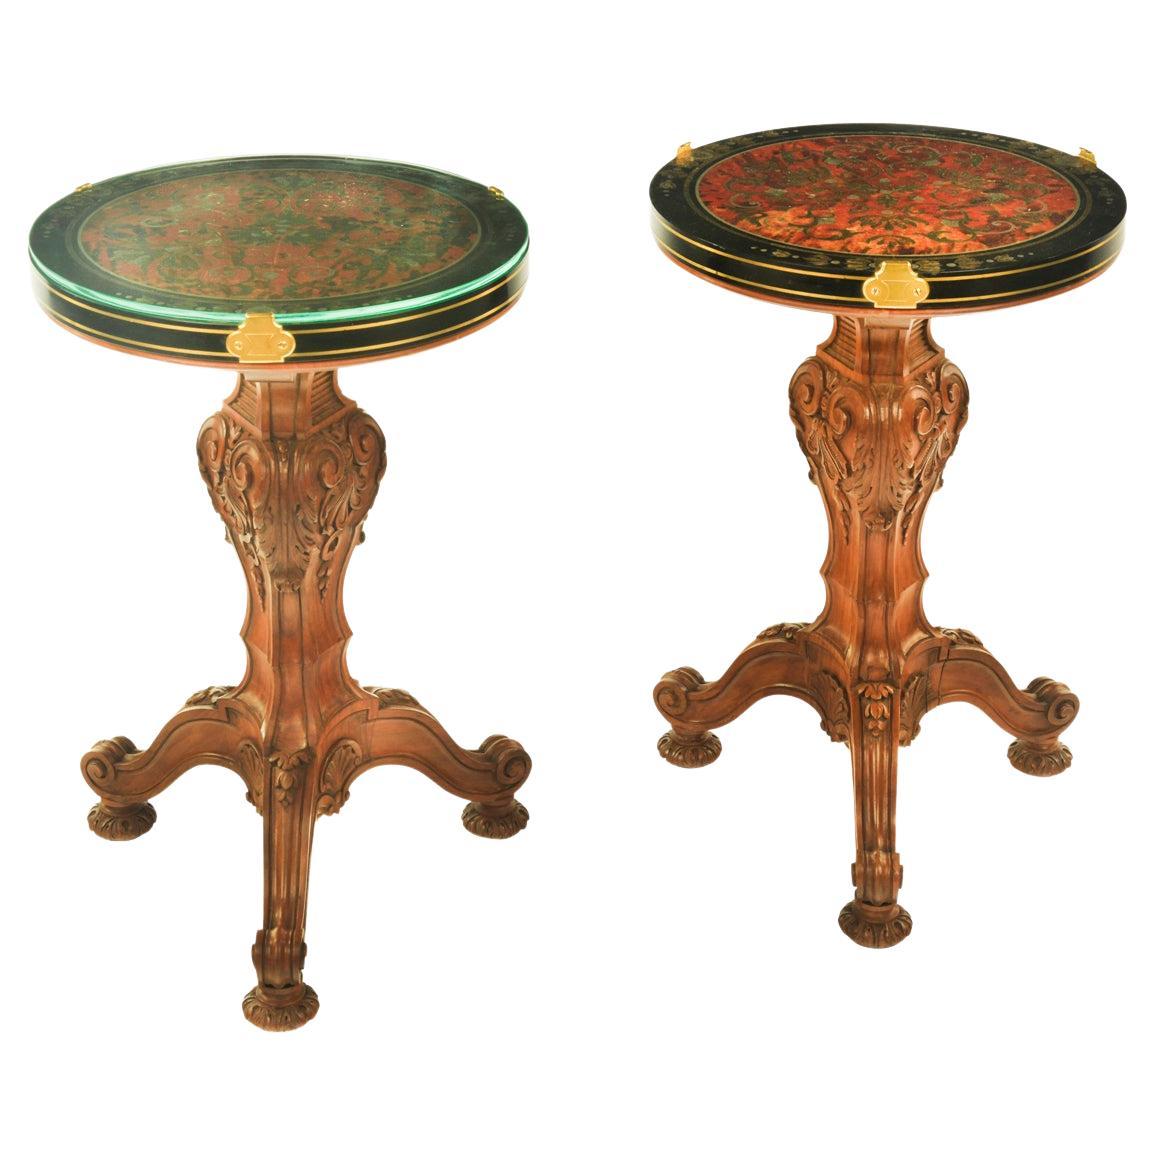 Pair of Small Walnut Tables with Boulle-Work Tops by Pillinini For Sale